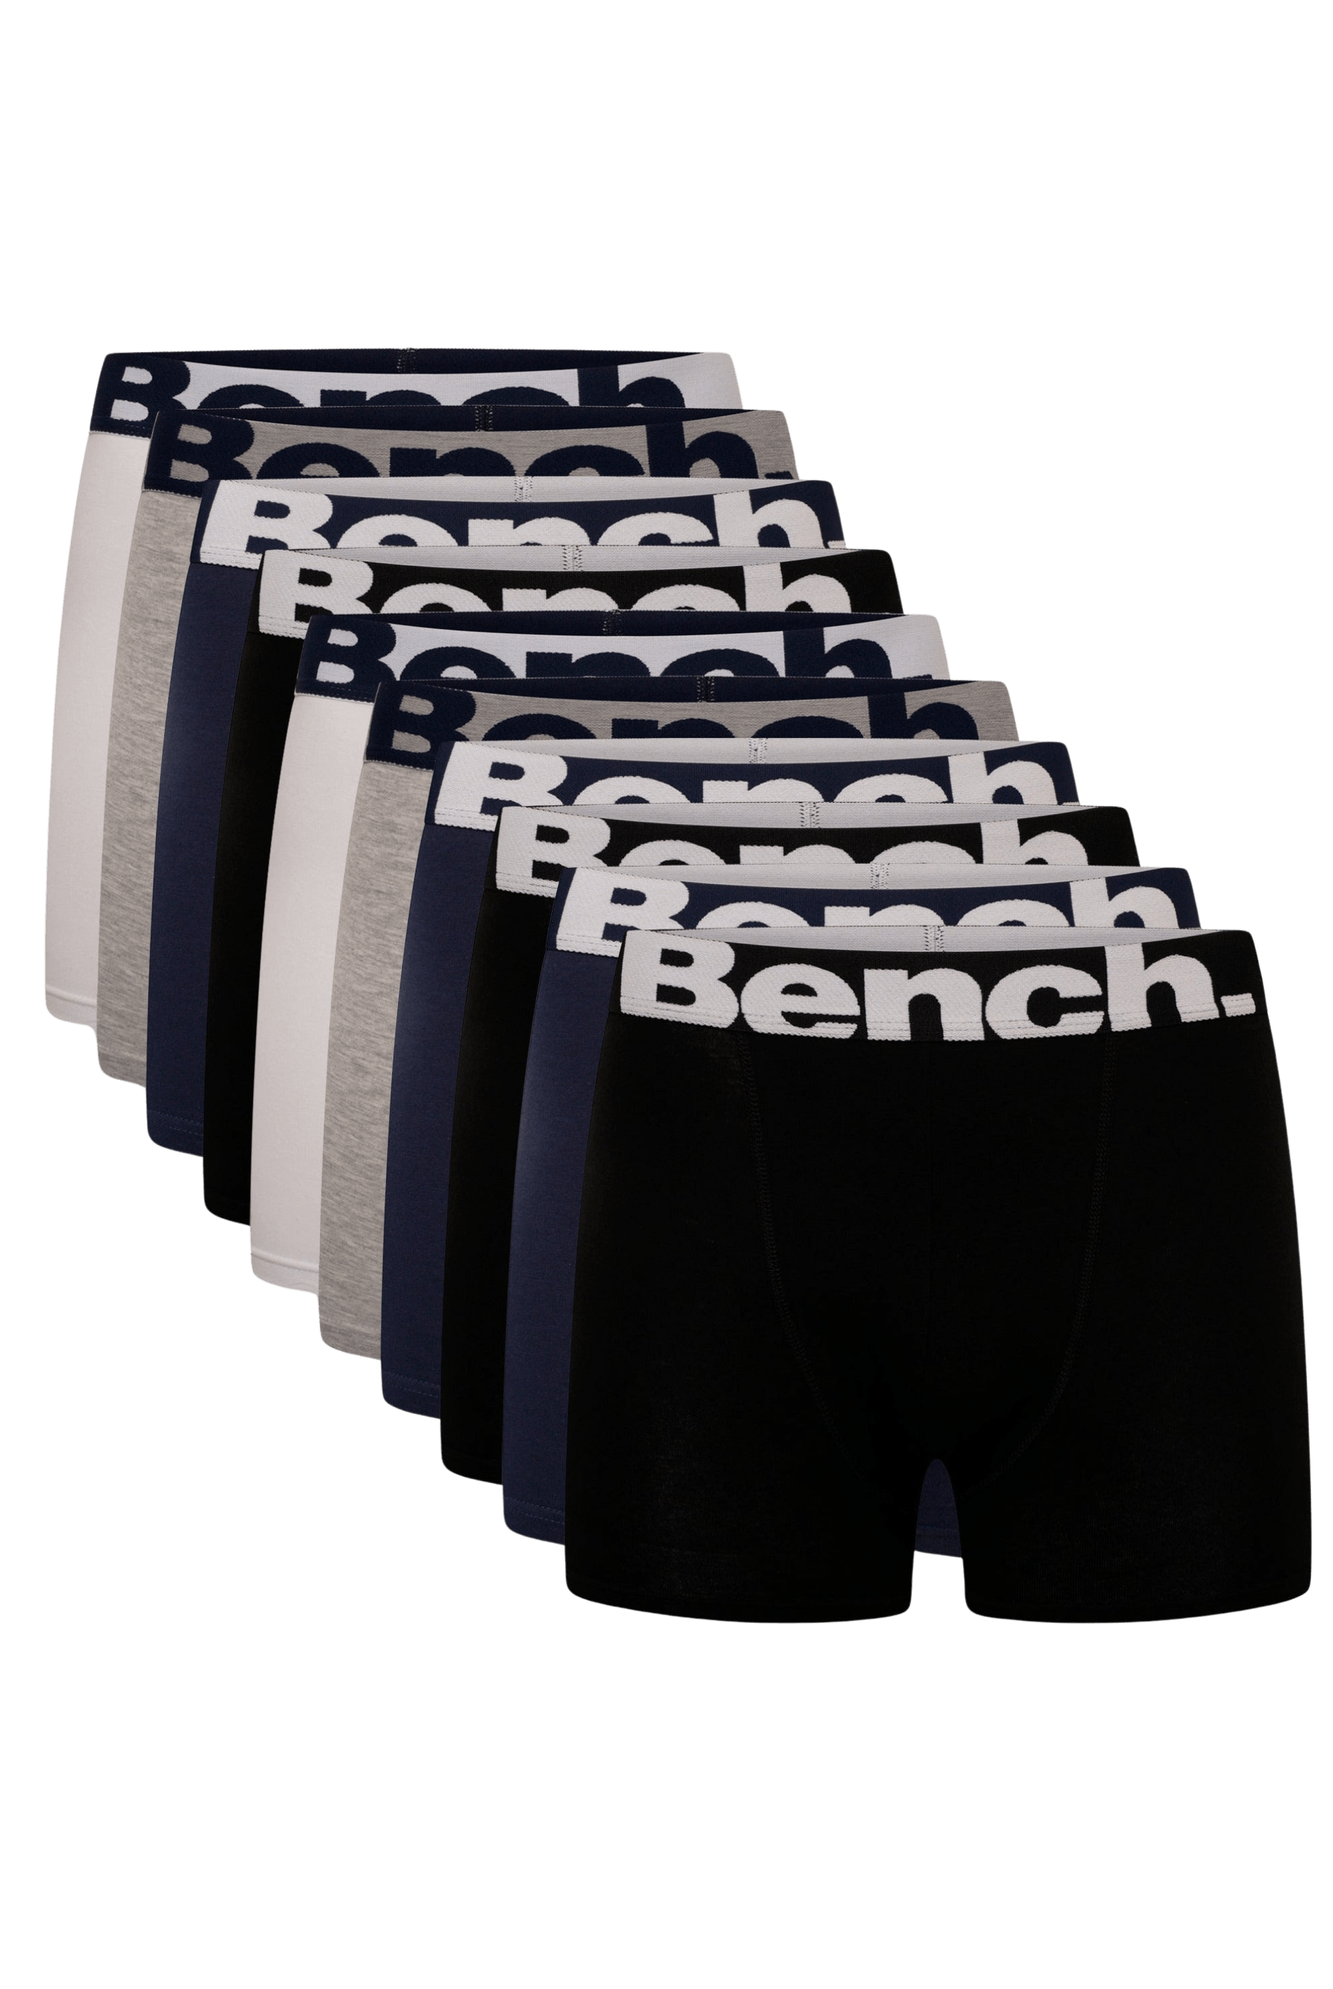 Bench Mens Boxer Shorts / Trunks - Assorted 6 Pack - All Sizes - Great  Value